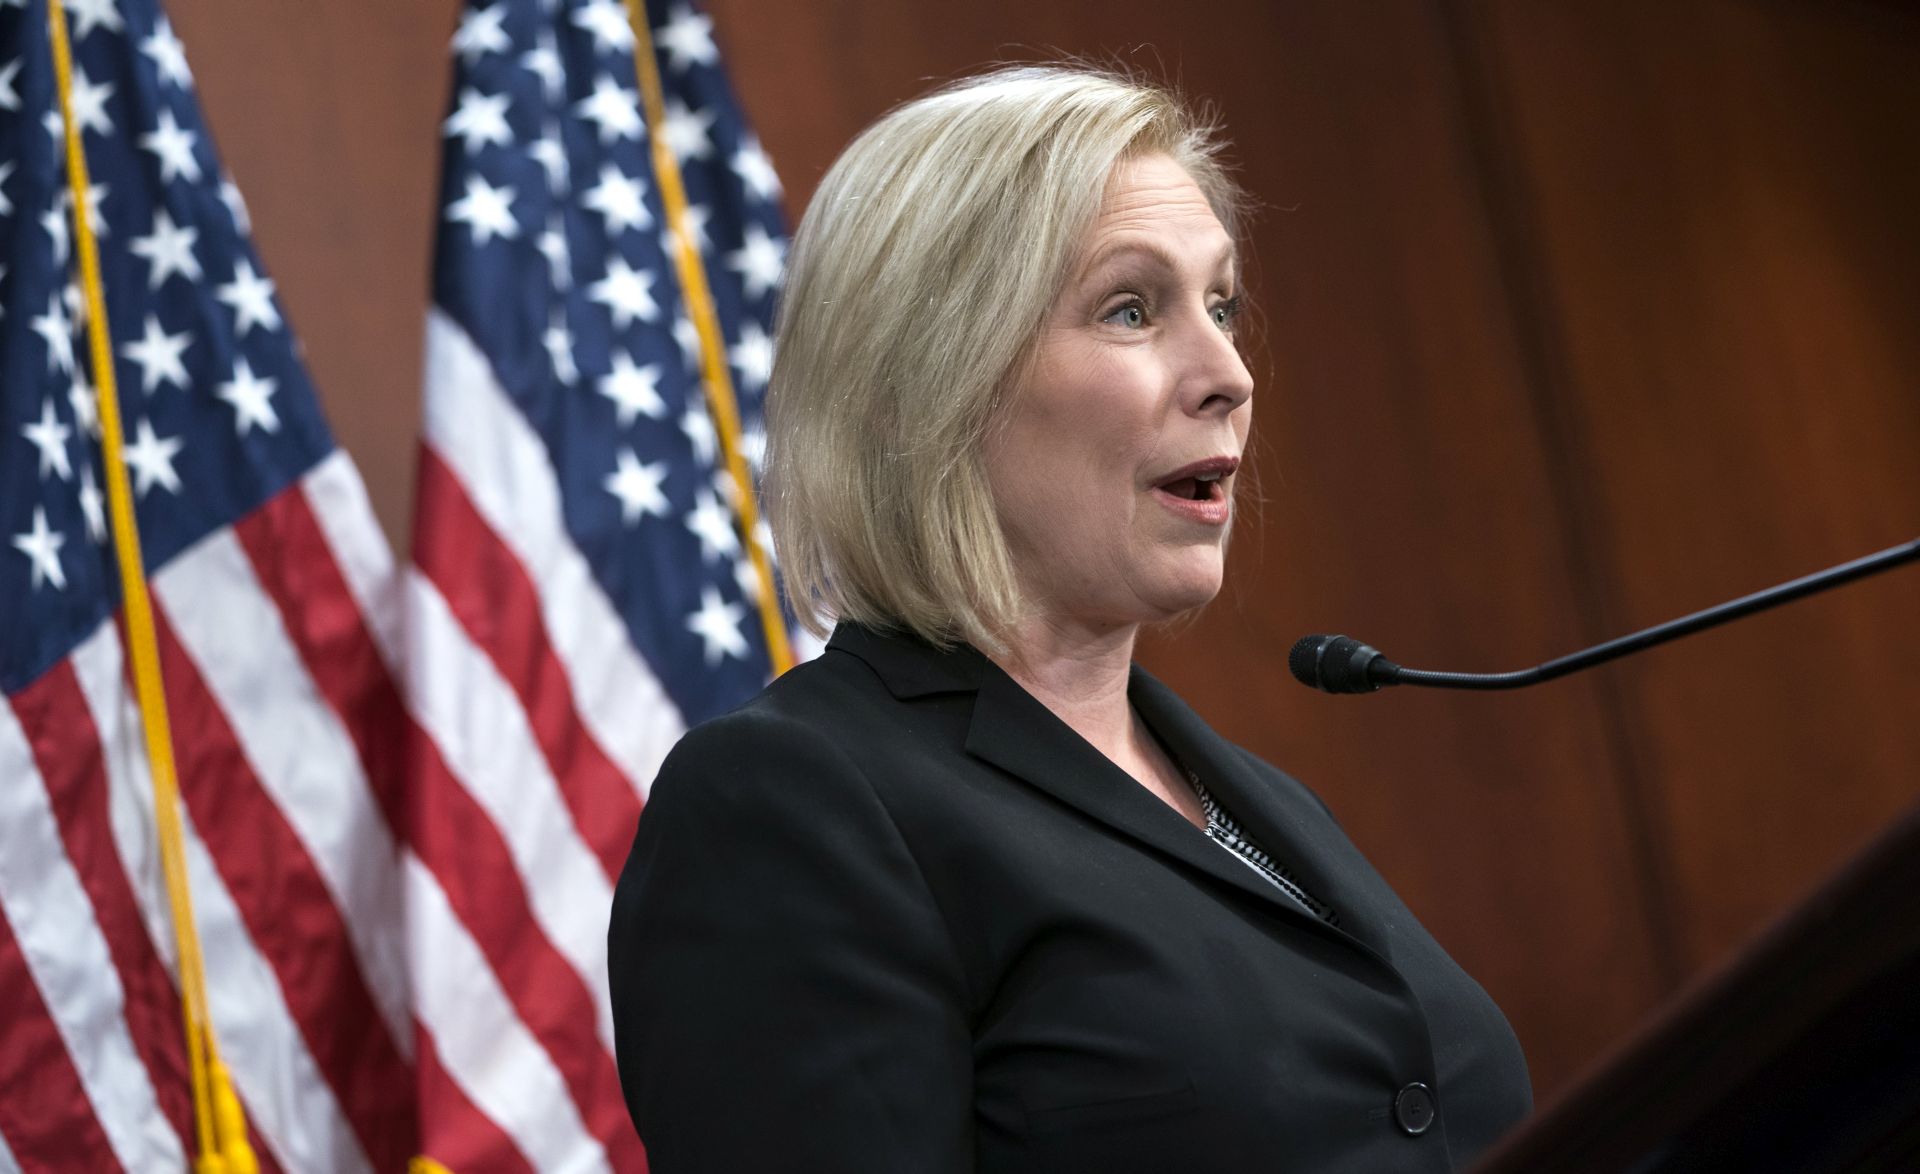 epa06385248 Democratic Senator from New York, Kirsten Gillibrand, speaks about President Trump's sexually suggestive tweet about her in the US Capitol in Washington, DC, USA, 12 December 2017. In response to the President's suggestion that she would 'do anything' for money, Gillibrand said 'you cannot silence me or the millions of women who have gotten off the sidelines to speak out about the unfitness and shame you have brought to the Oval Office.'  EPA/JIM LO SCALZO